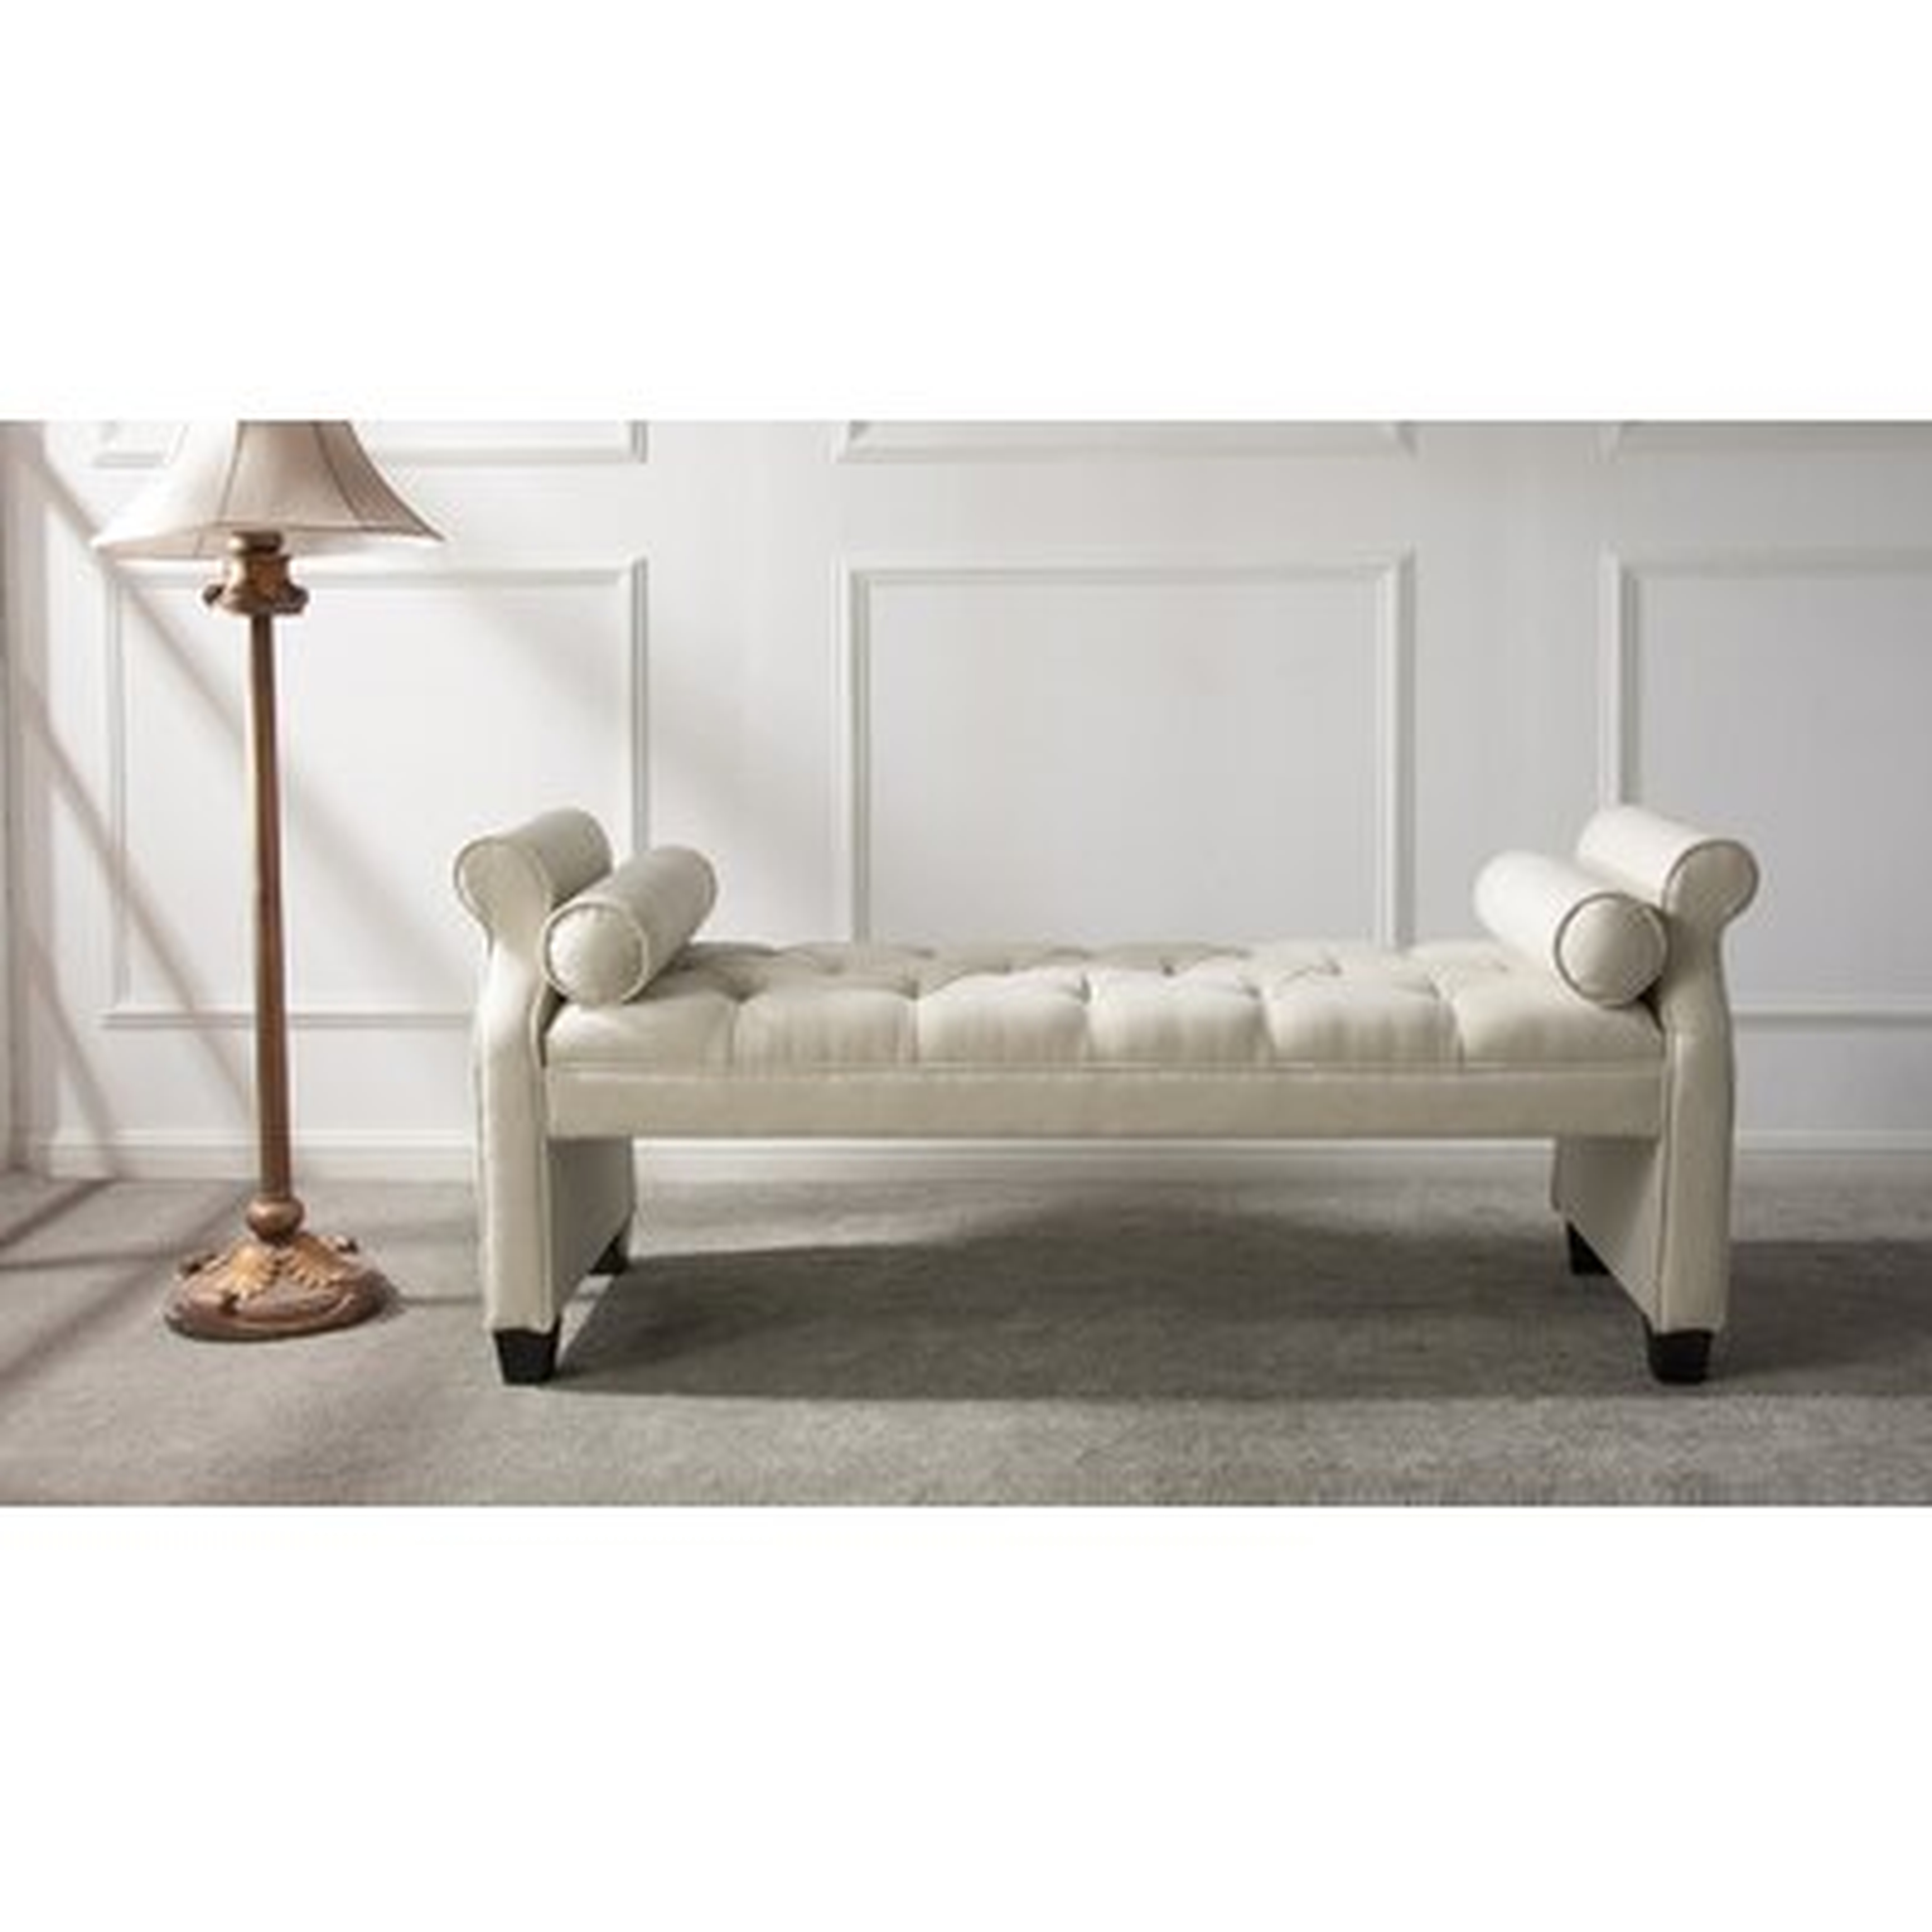 Belby Upholstered Bench - Wayfair